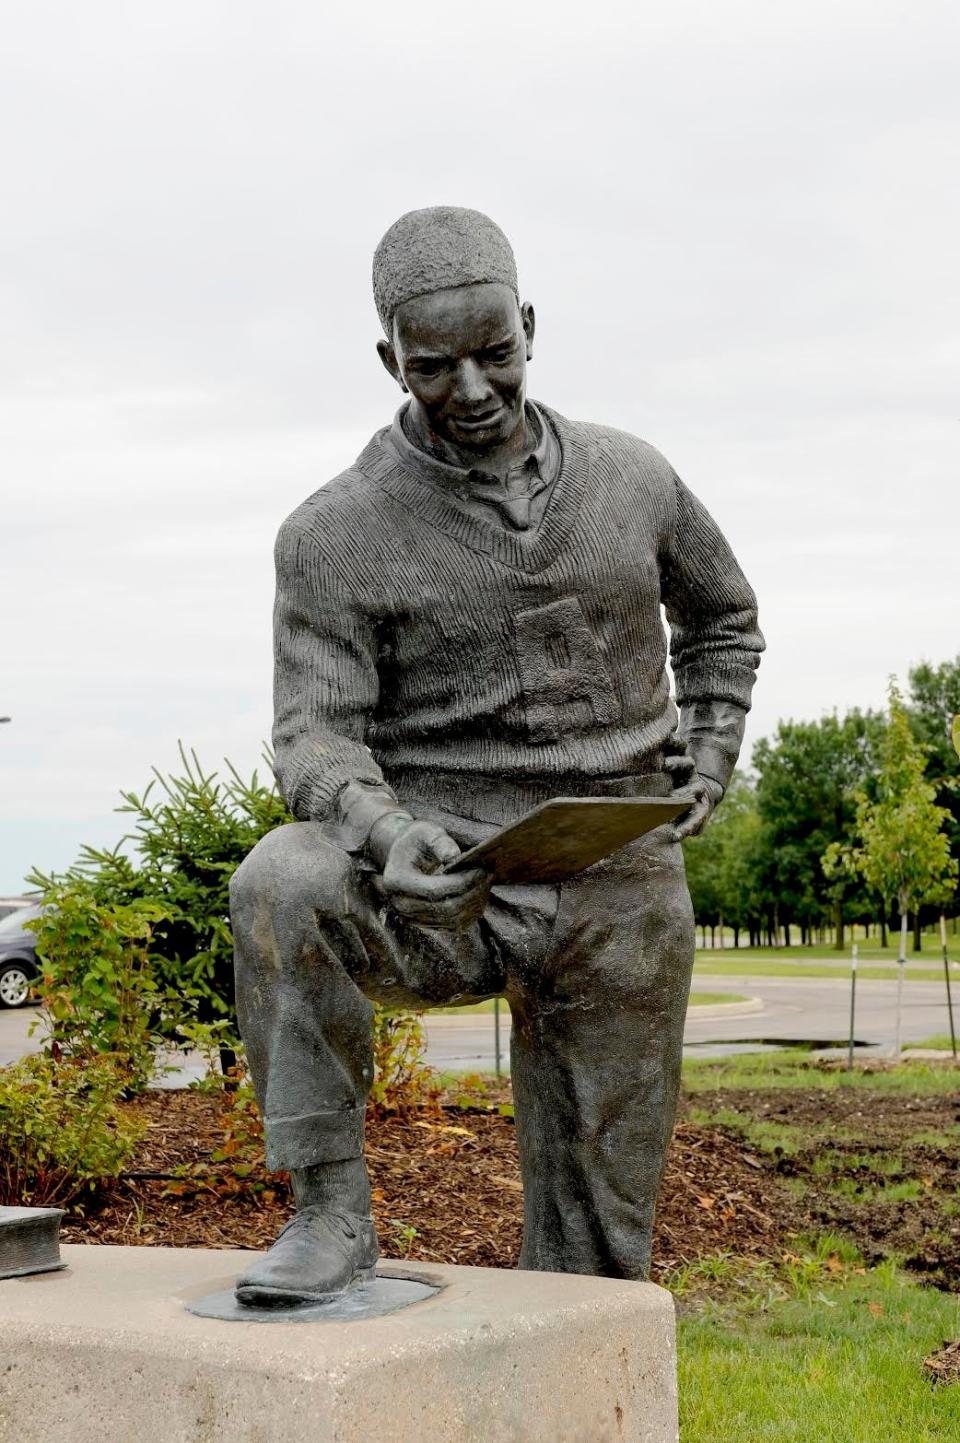 A statue of Jack Trice, Iowa State's first Black athlete, stands on the Ames campus.